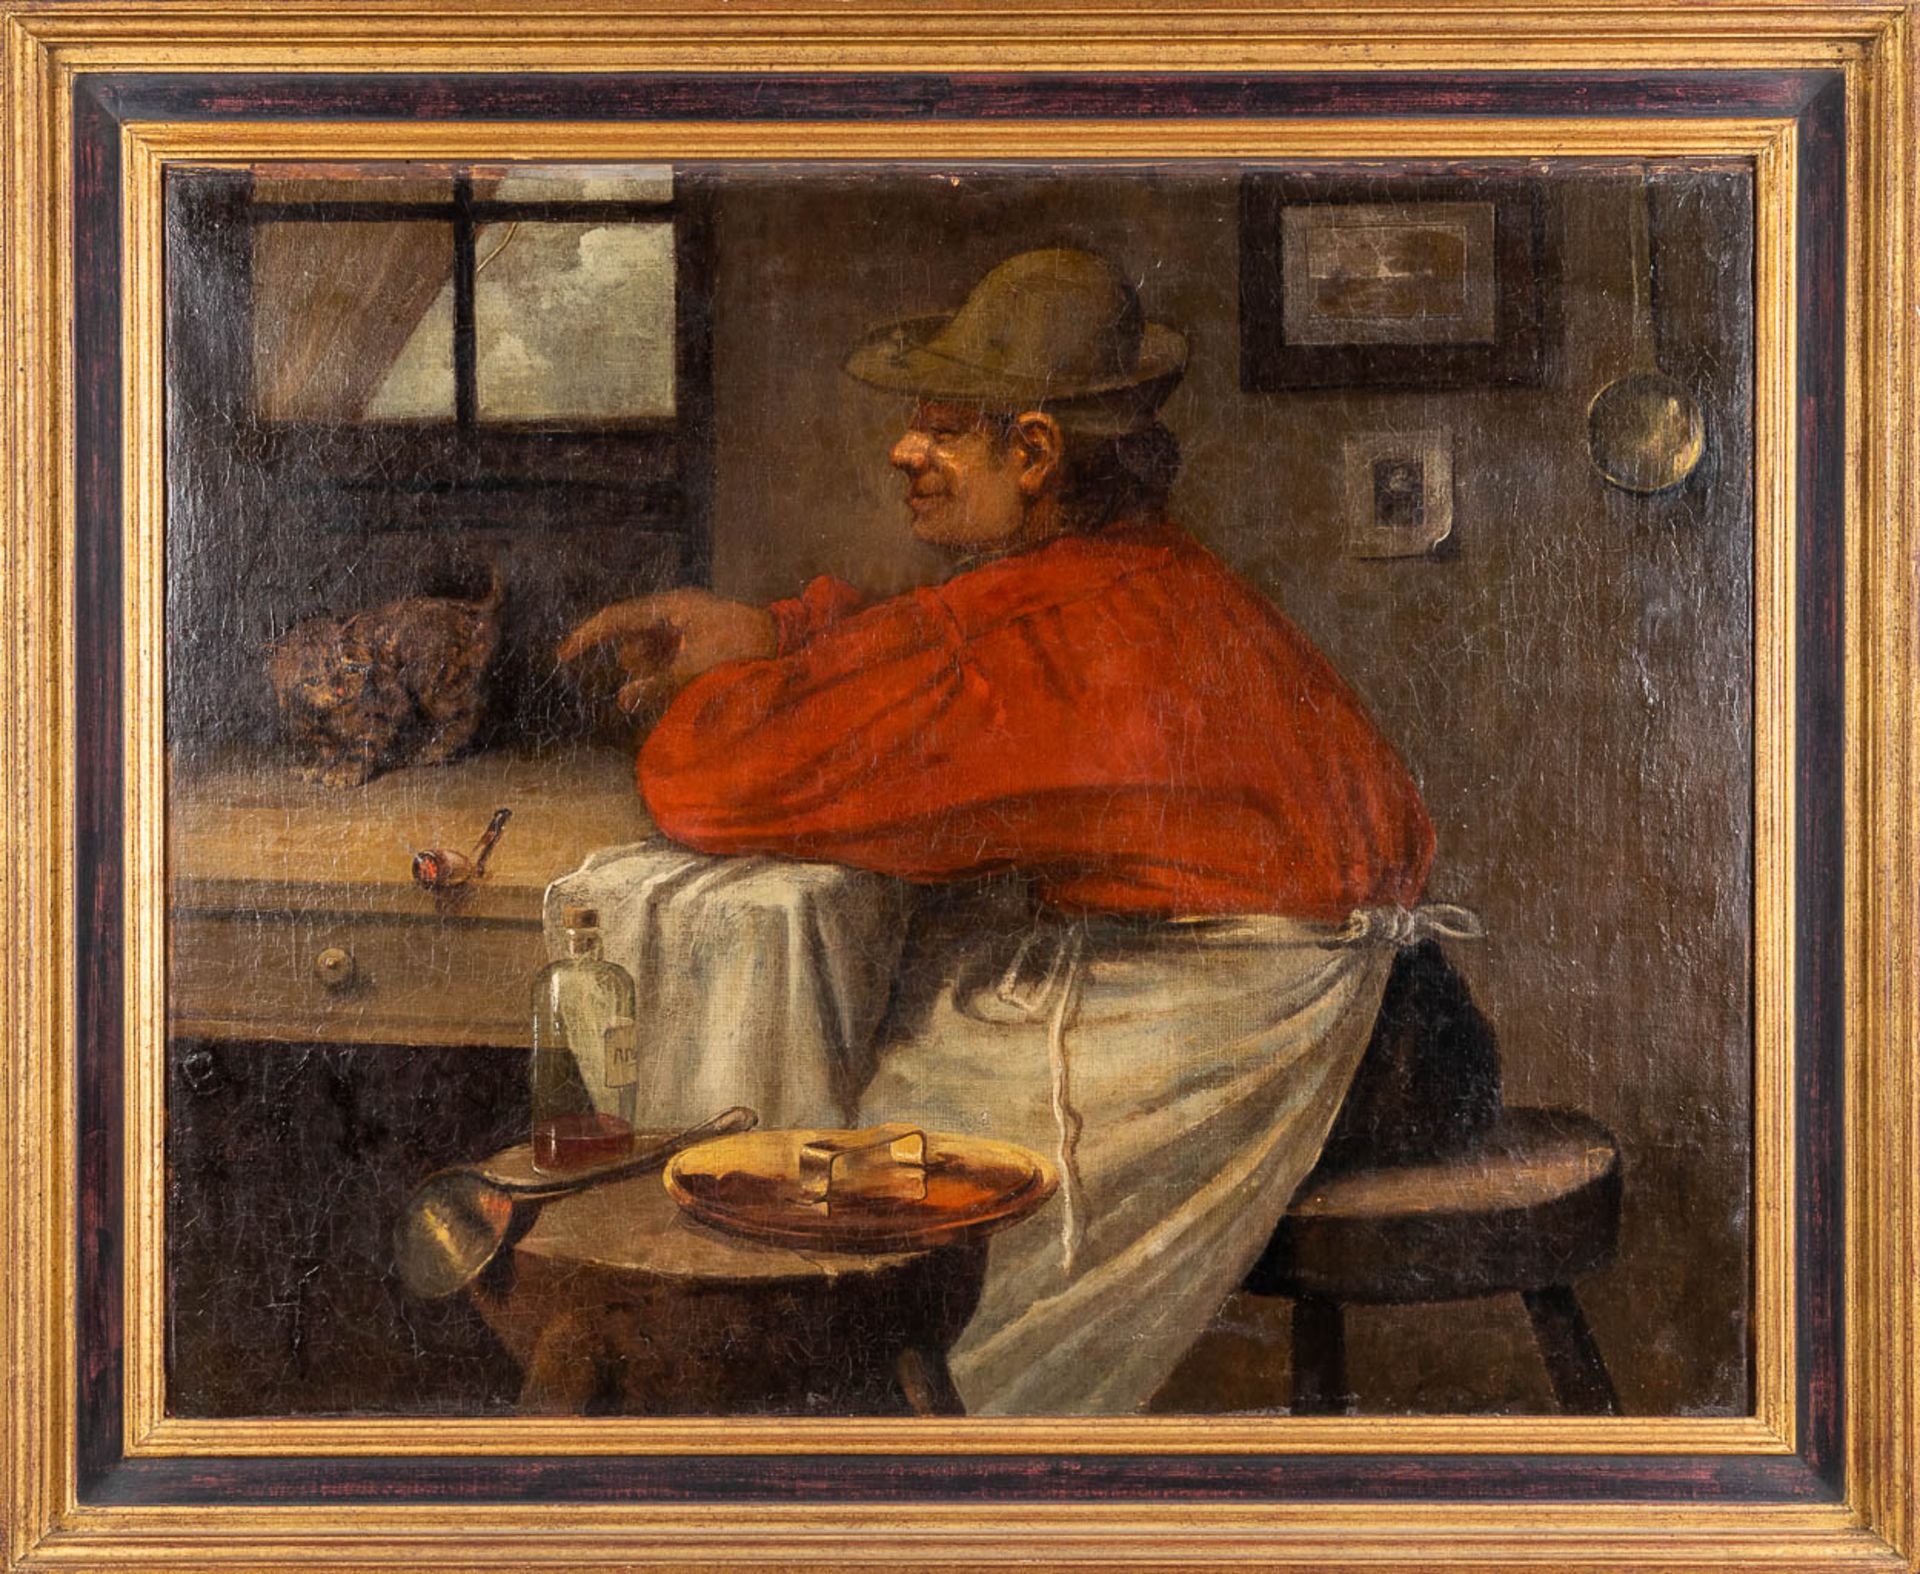 Farmer with a cat, a painting, oil on canvas. No signature found. 19th C. (W: 81 x H: 65 cm) - Image 3 of 8